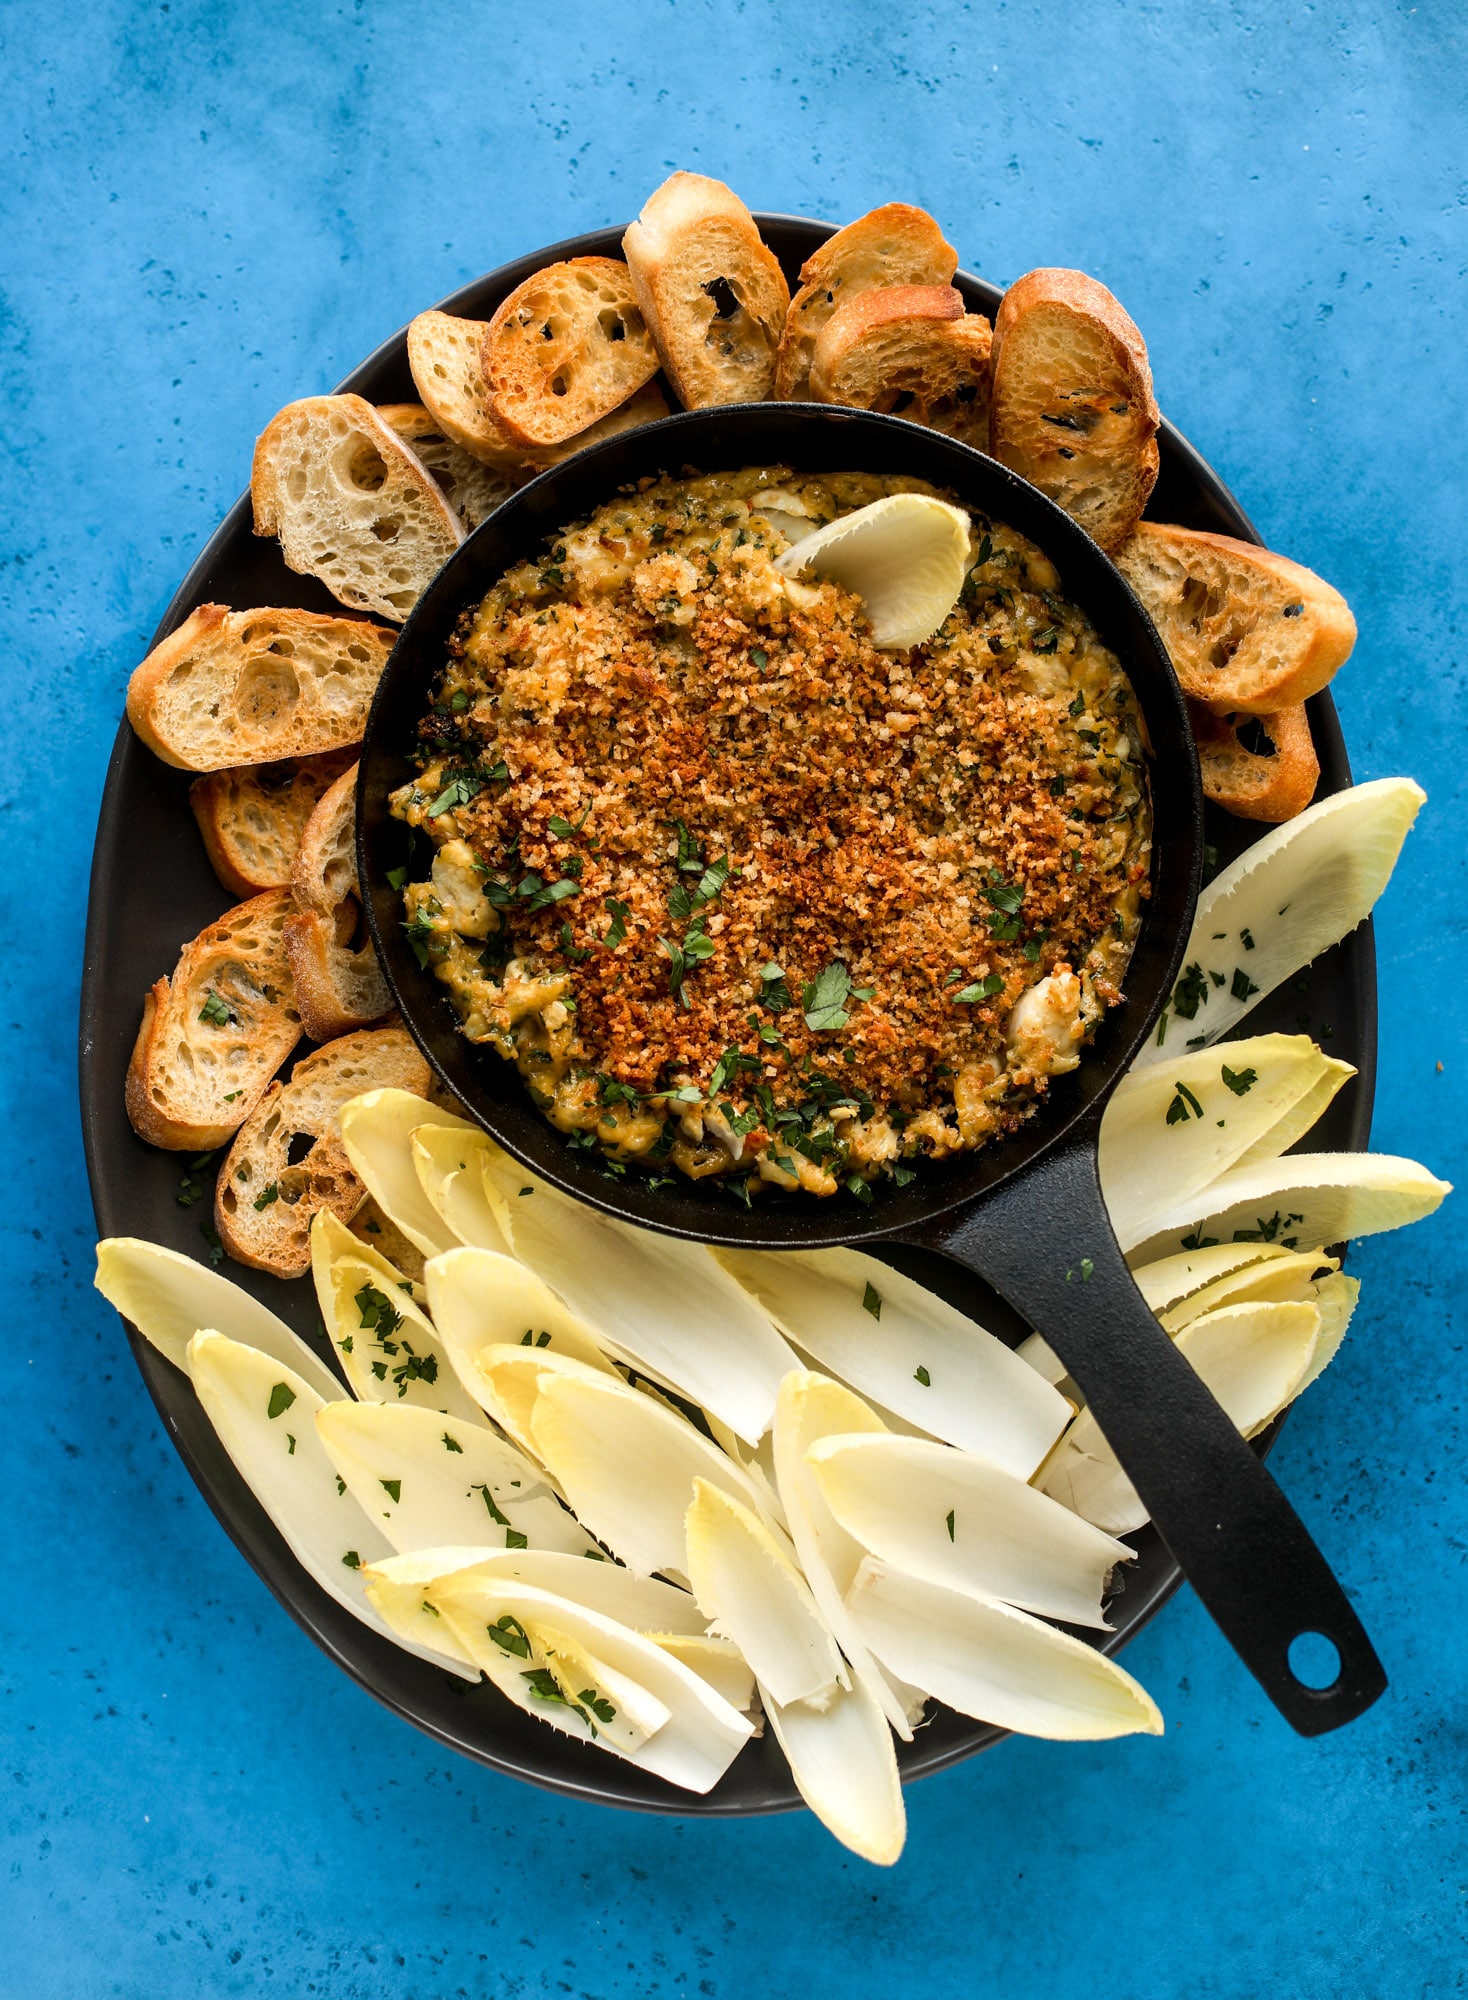 This deviled crab dip is the perfect hot summer appetizer. Lump crab, a creamy, decadent sauce, crunchy breadcrumbs and fresh endive for dipping. YES.